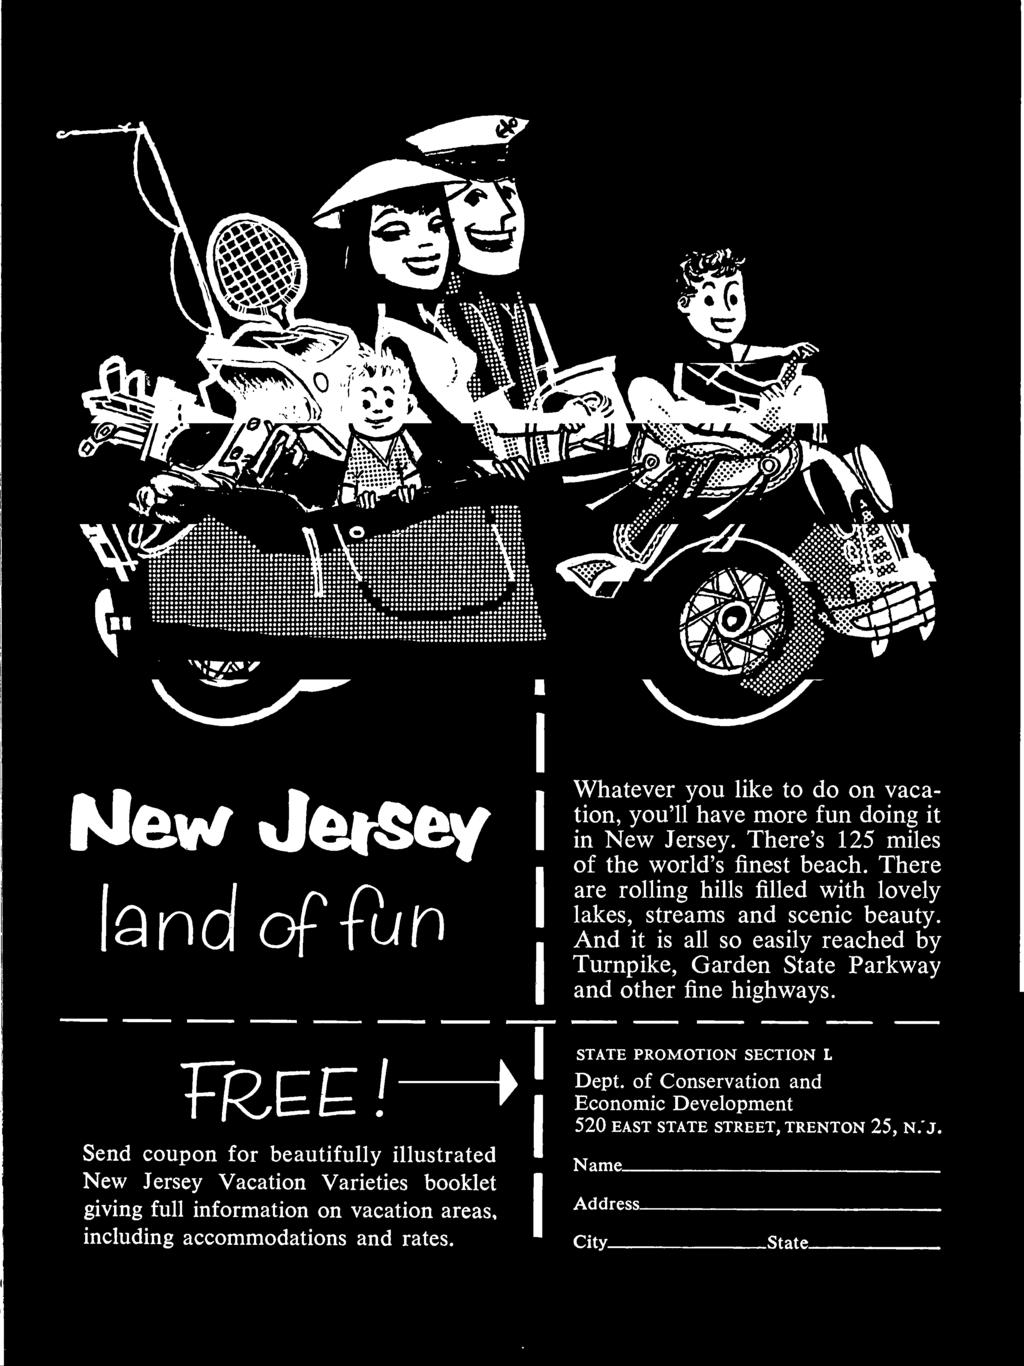 Send coupon for beautifully illustrated New Jersey Vacation Varieties booklet giving full information